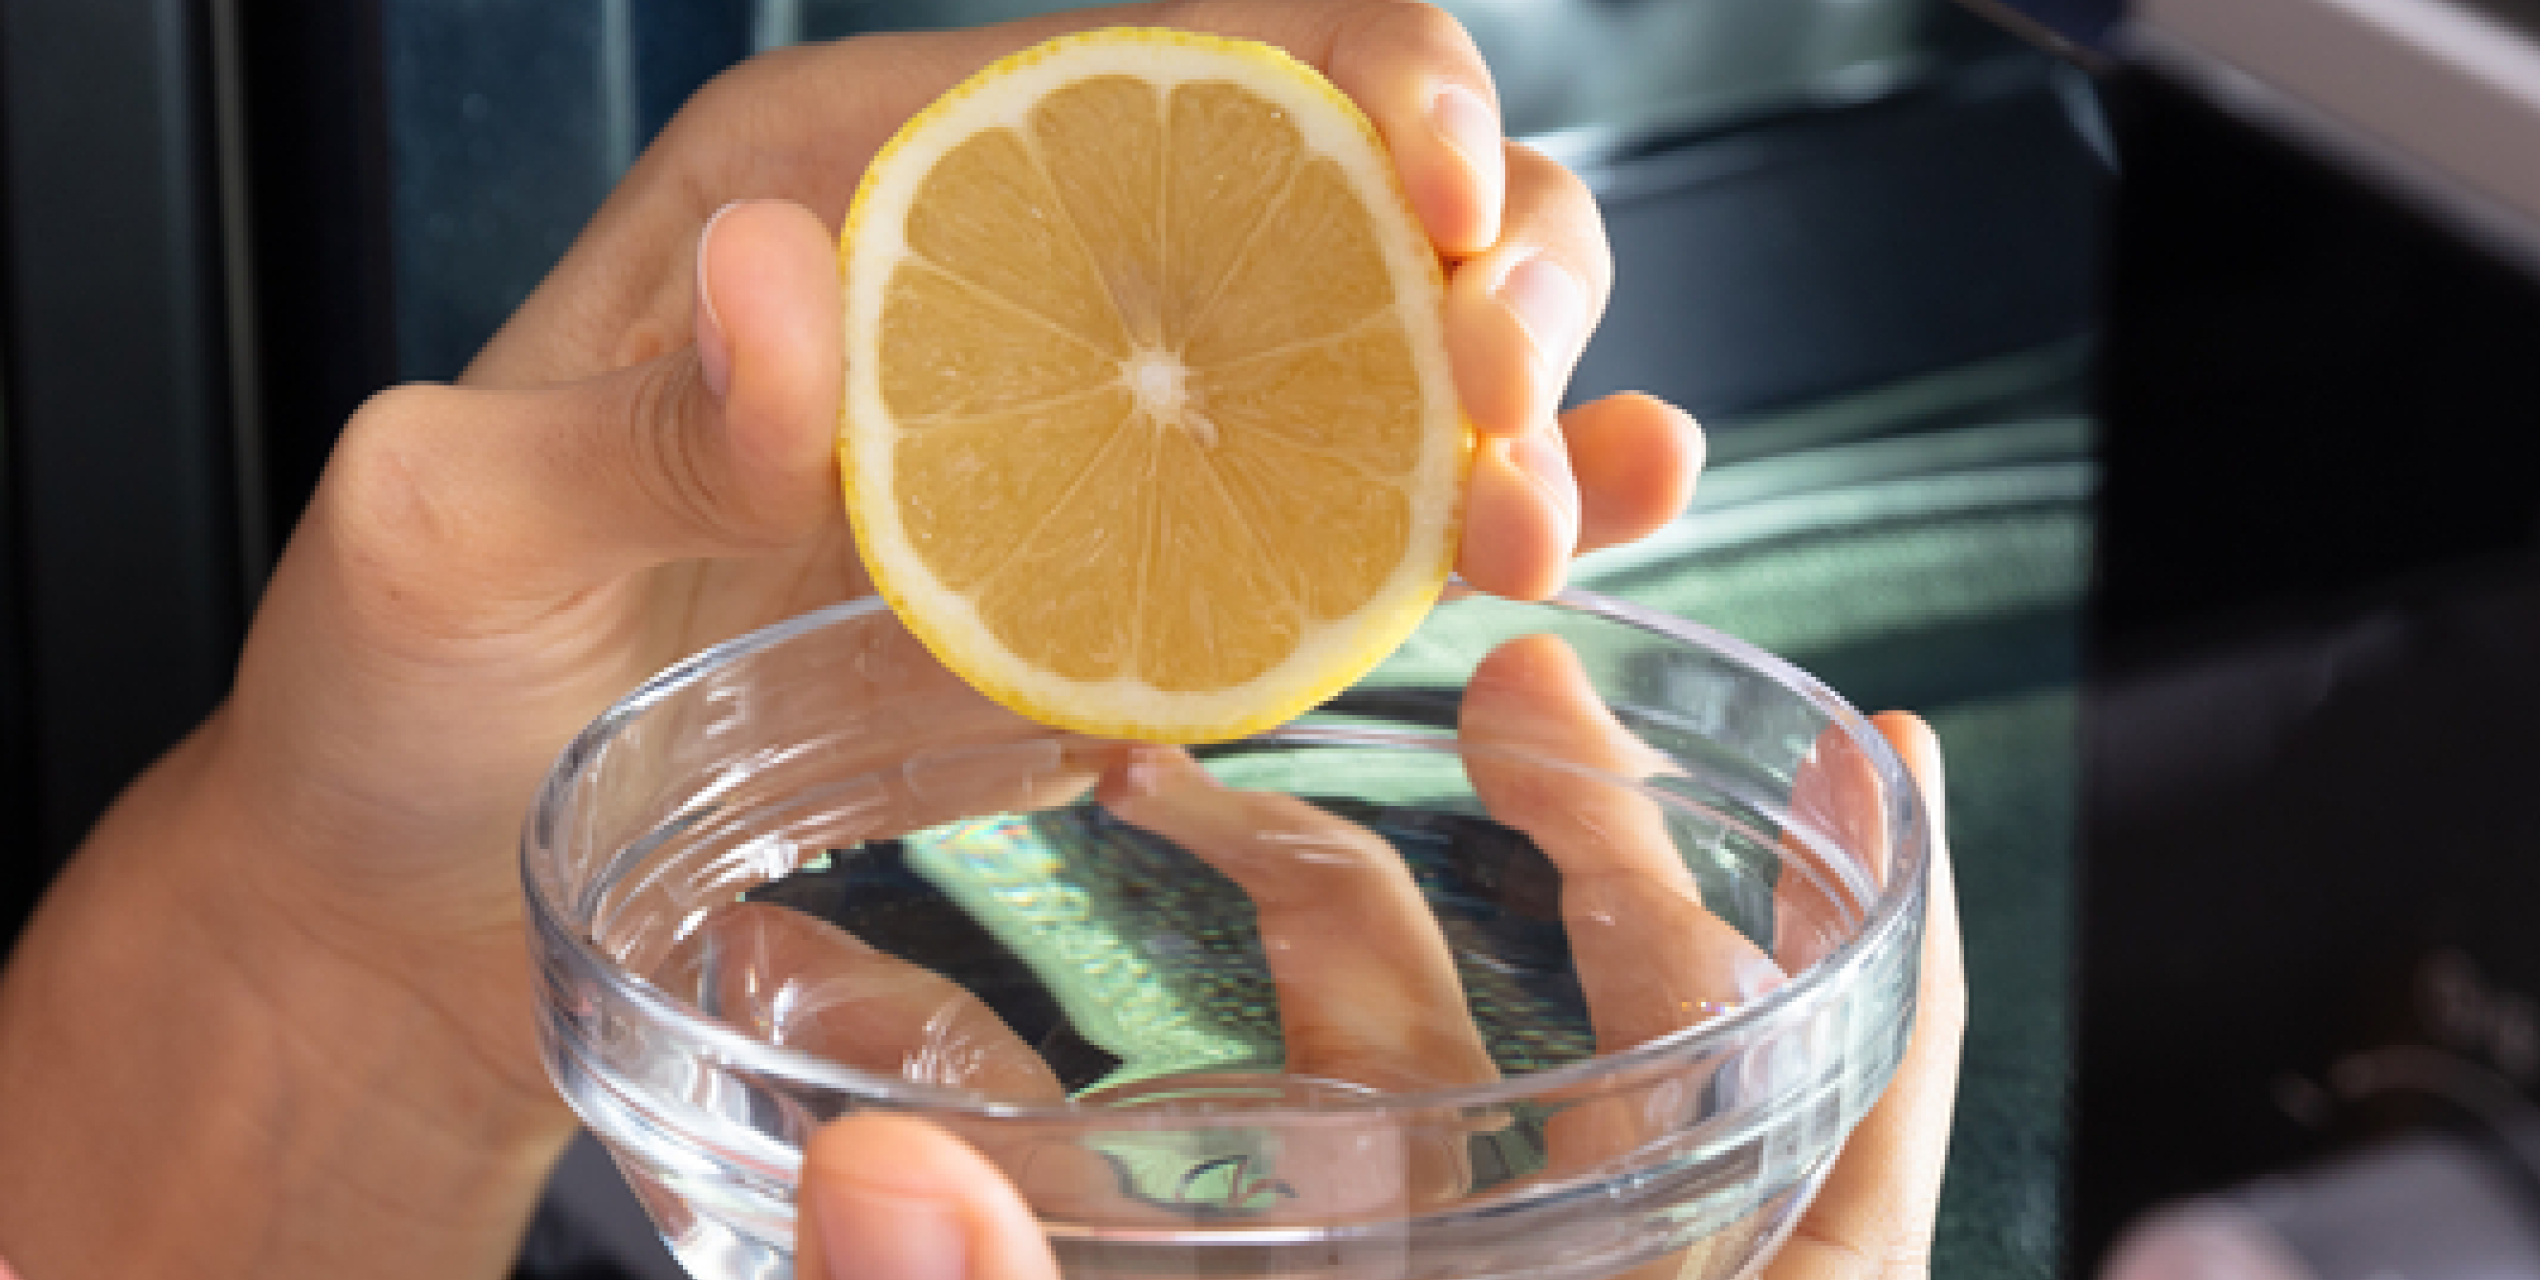 How to clean an oven with lemon